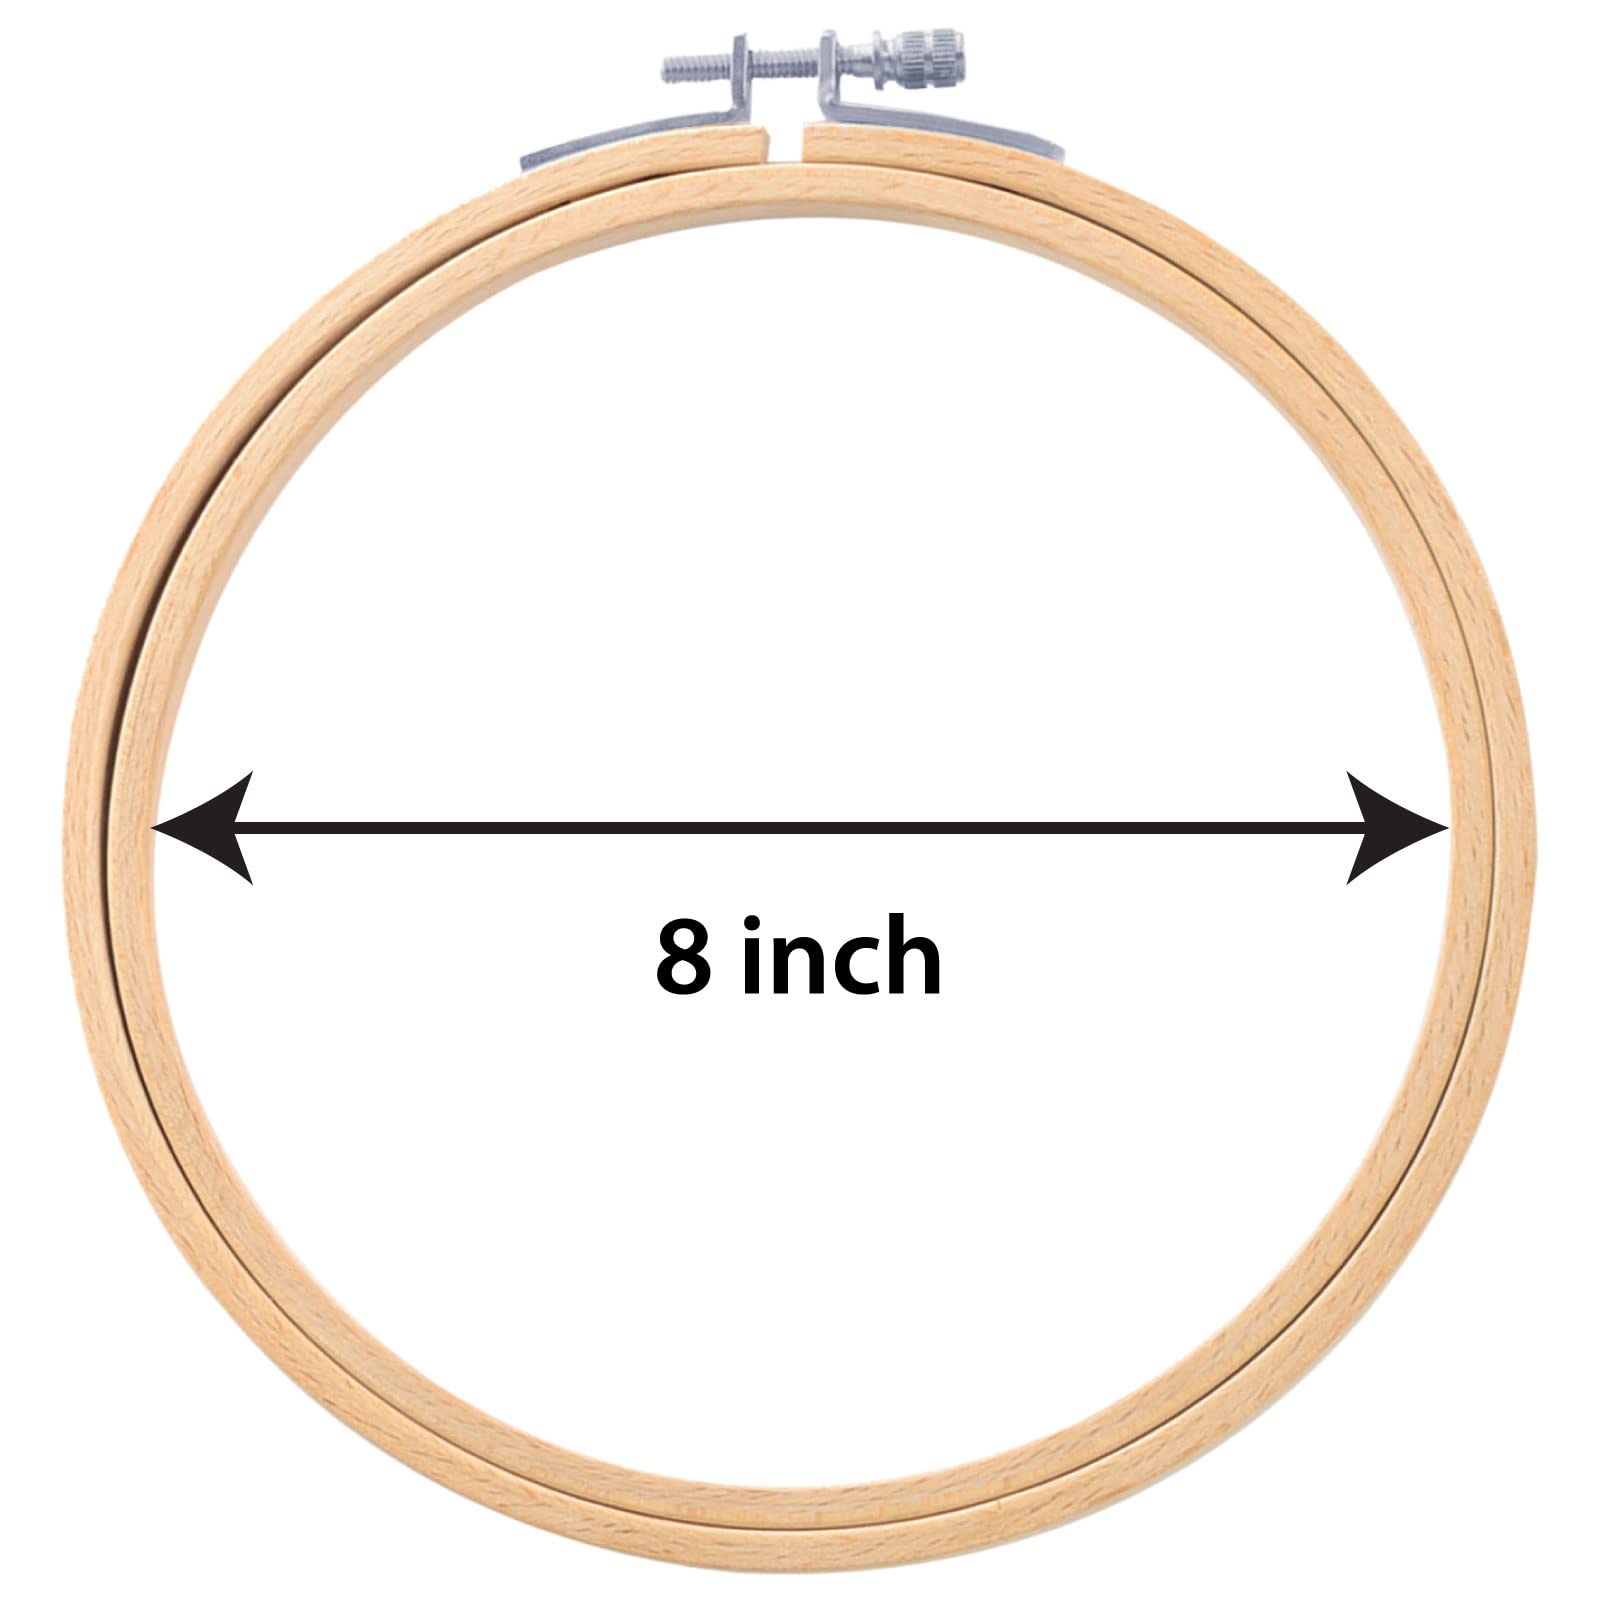 Wooden Embroidery Hoop – 12 inch – Craftersdream